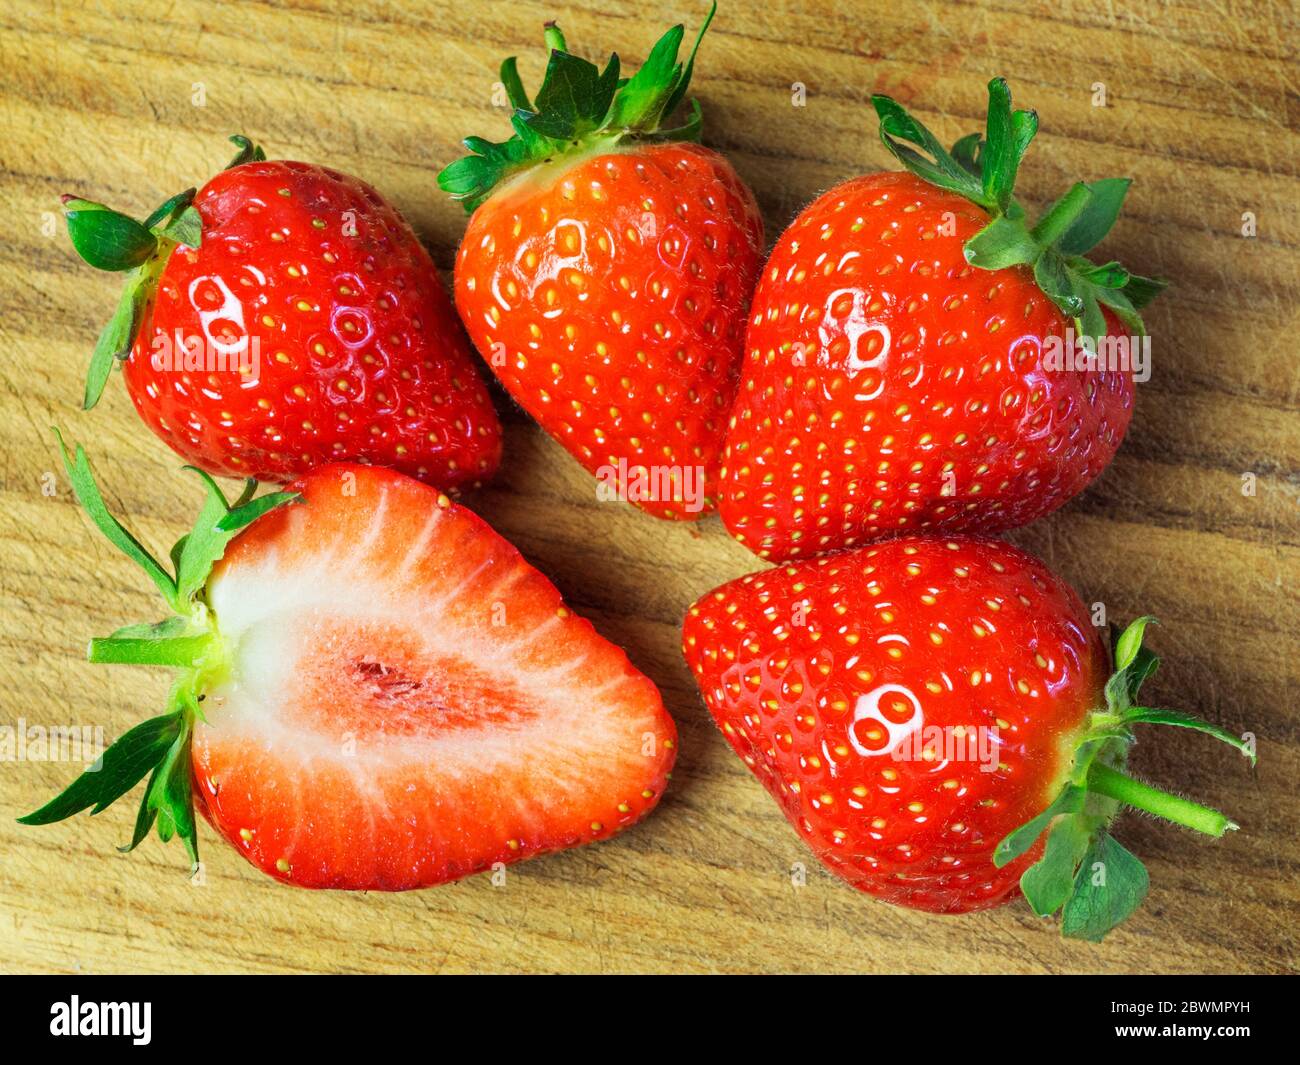 Four whole  strawberries and half a strawberry on a wooden chopping board Stock Photo